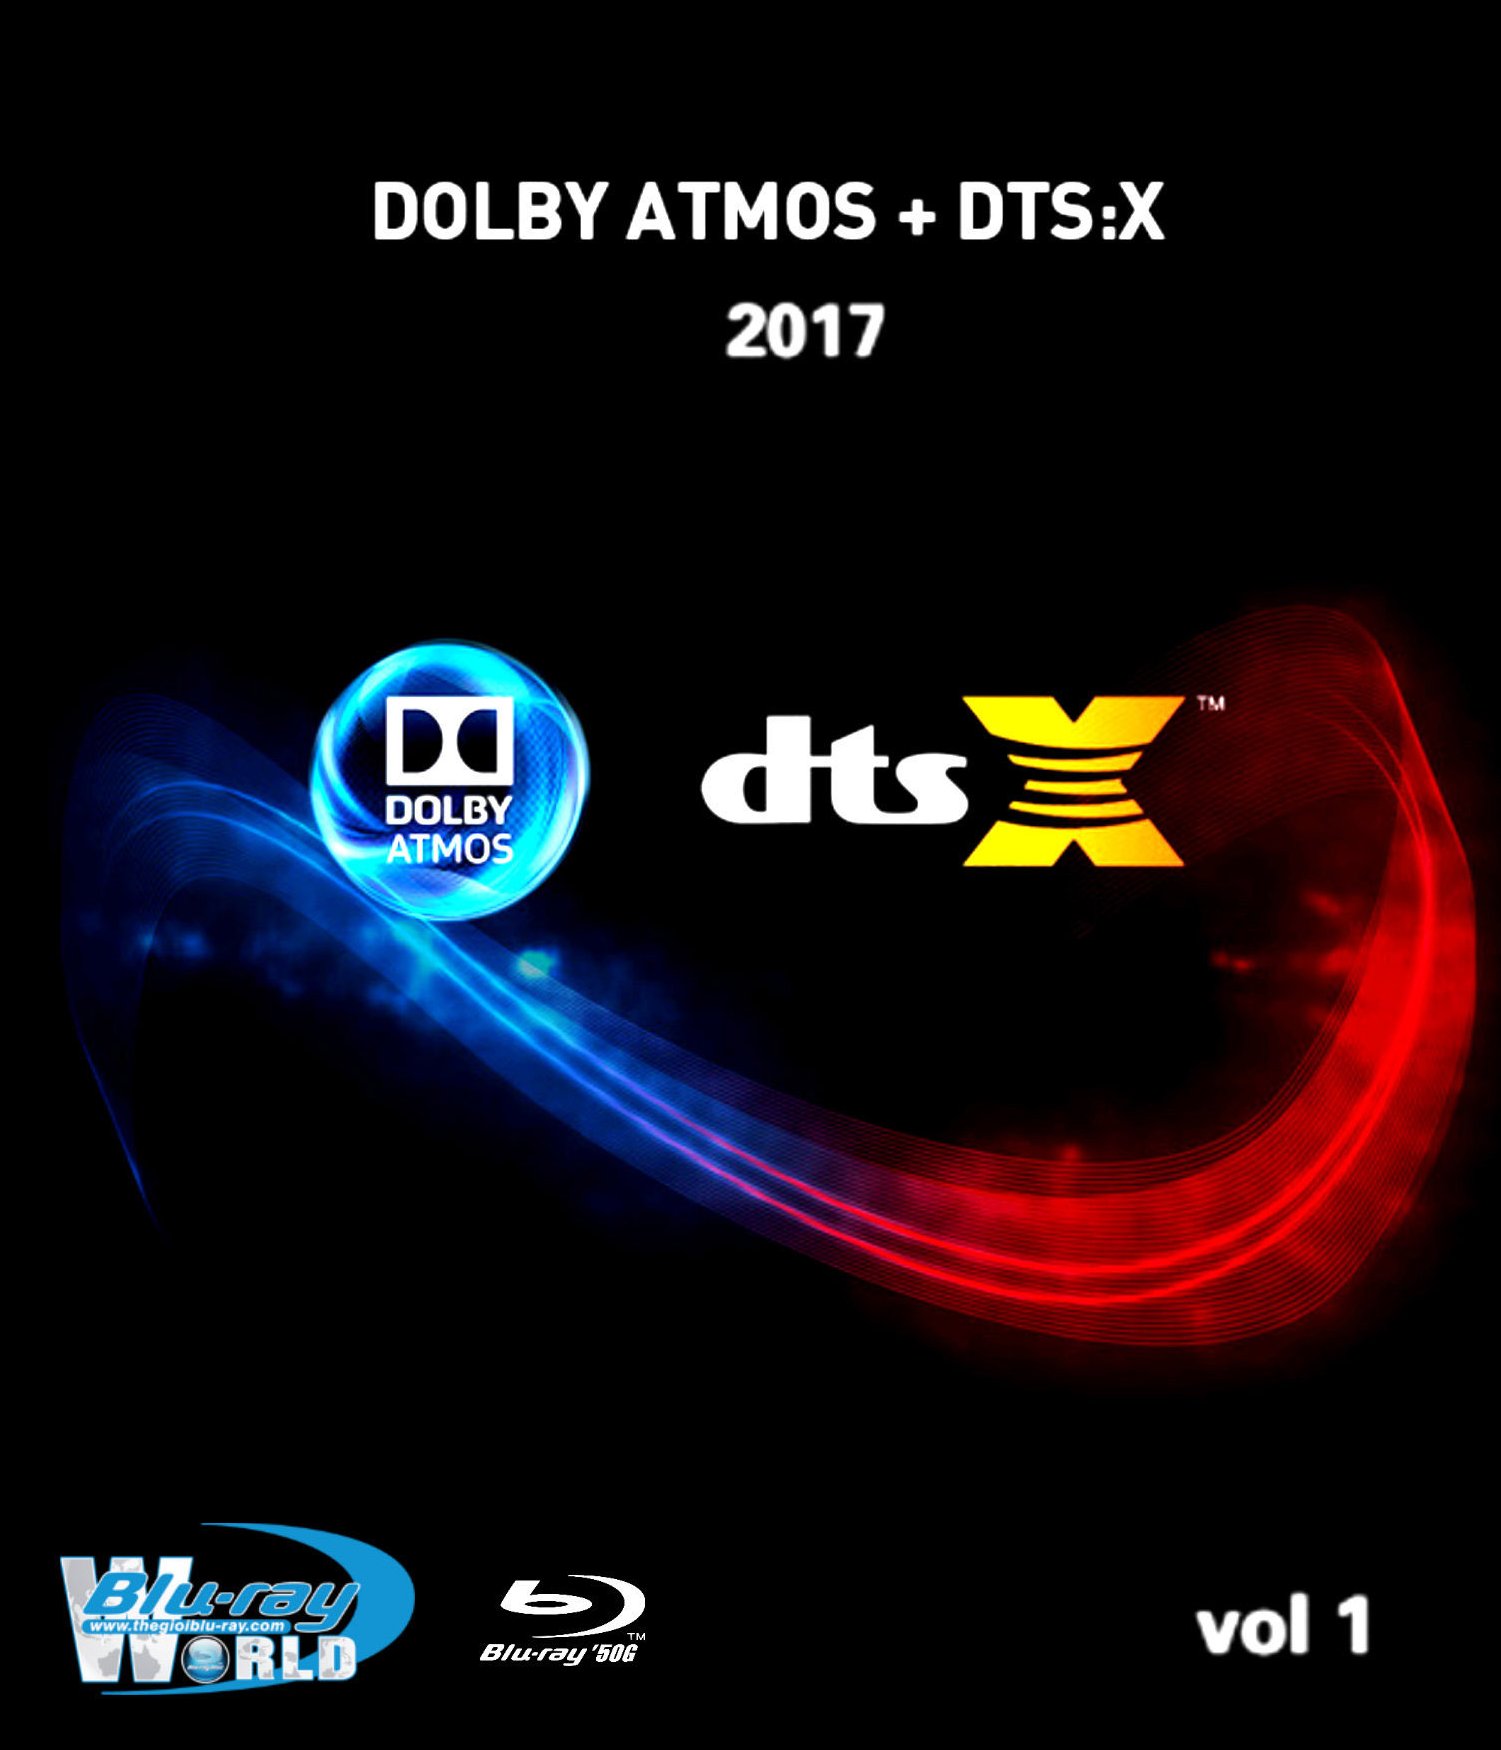 F1177.Bluray Test Collection Demo Disc Vol.1 2017 (50G)